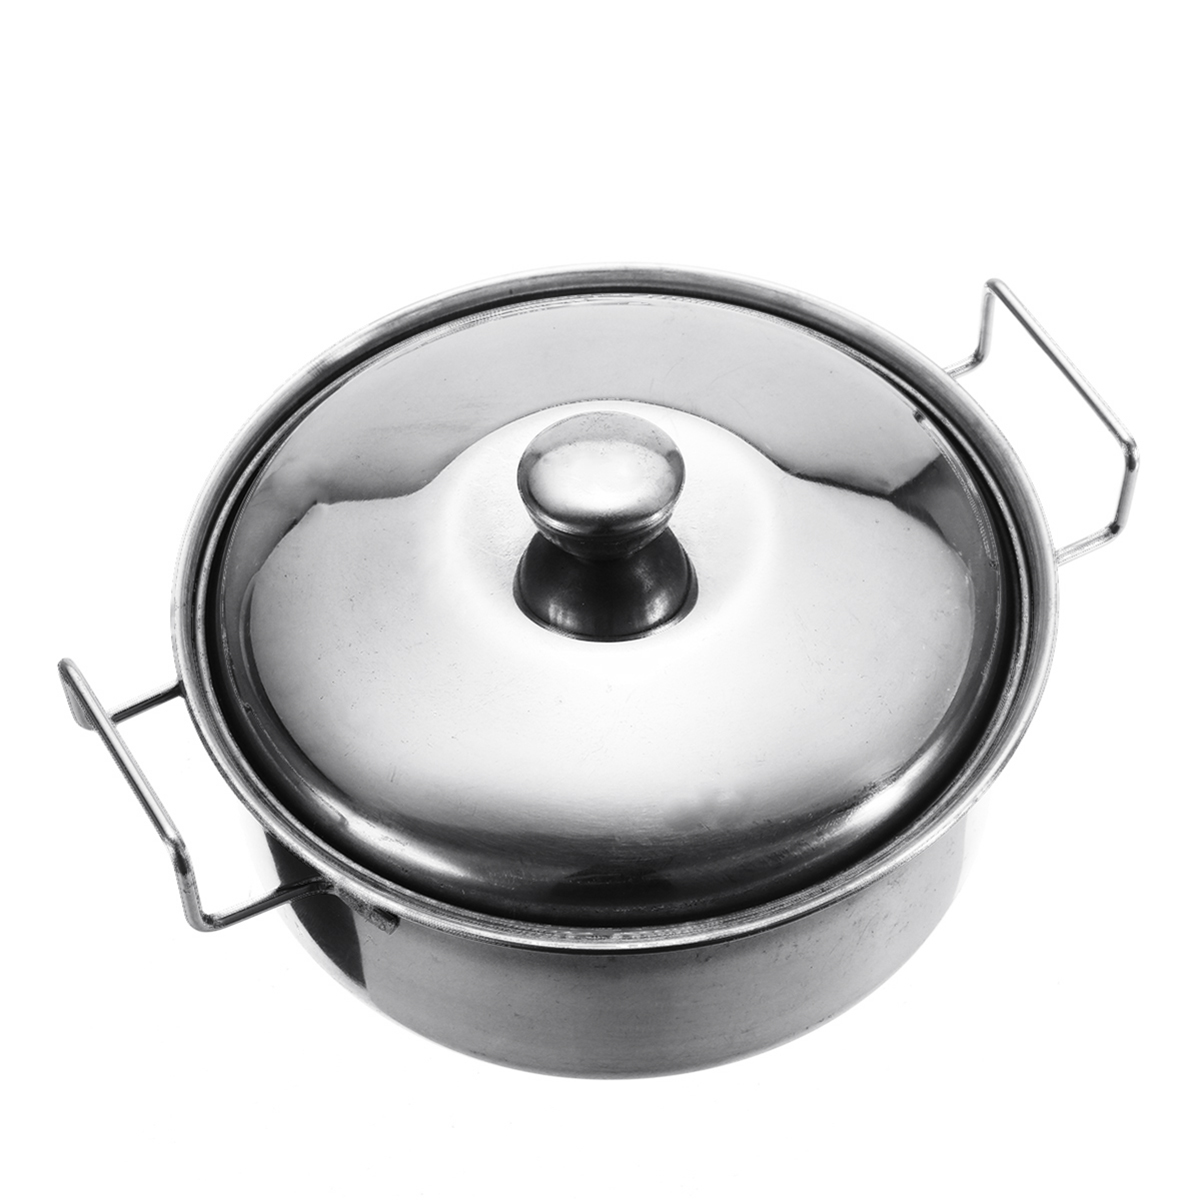 10pc-Stainless-steel-Cookware-Kitchen-Cooking-Set-Pot-Pans-House-Play-Toy-For-Children-1418086-5